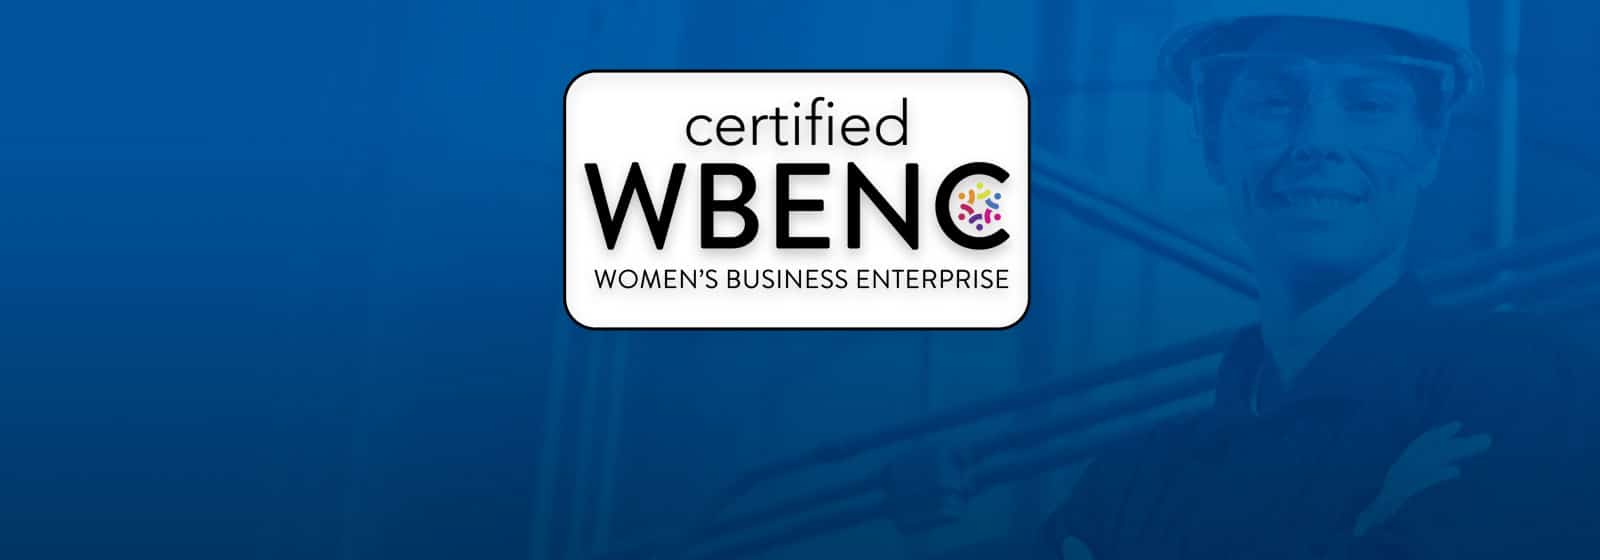 GREENWOOD IS PROUD TO BE A WOMEN-OWNED BUSINESS AS CERTIFIED THROUGH THE WOMEN’S BUSINESS ENTERPRISE NATIONAL COUNCIL (WBENC)